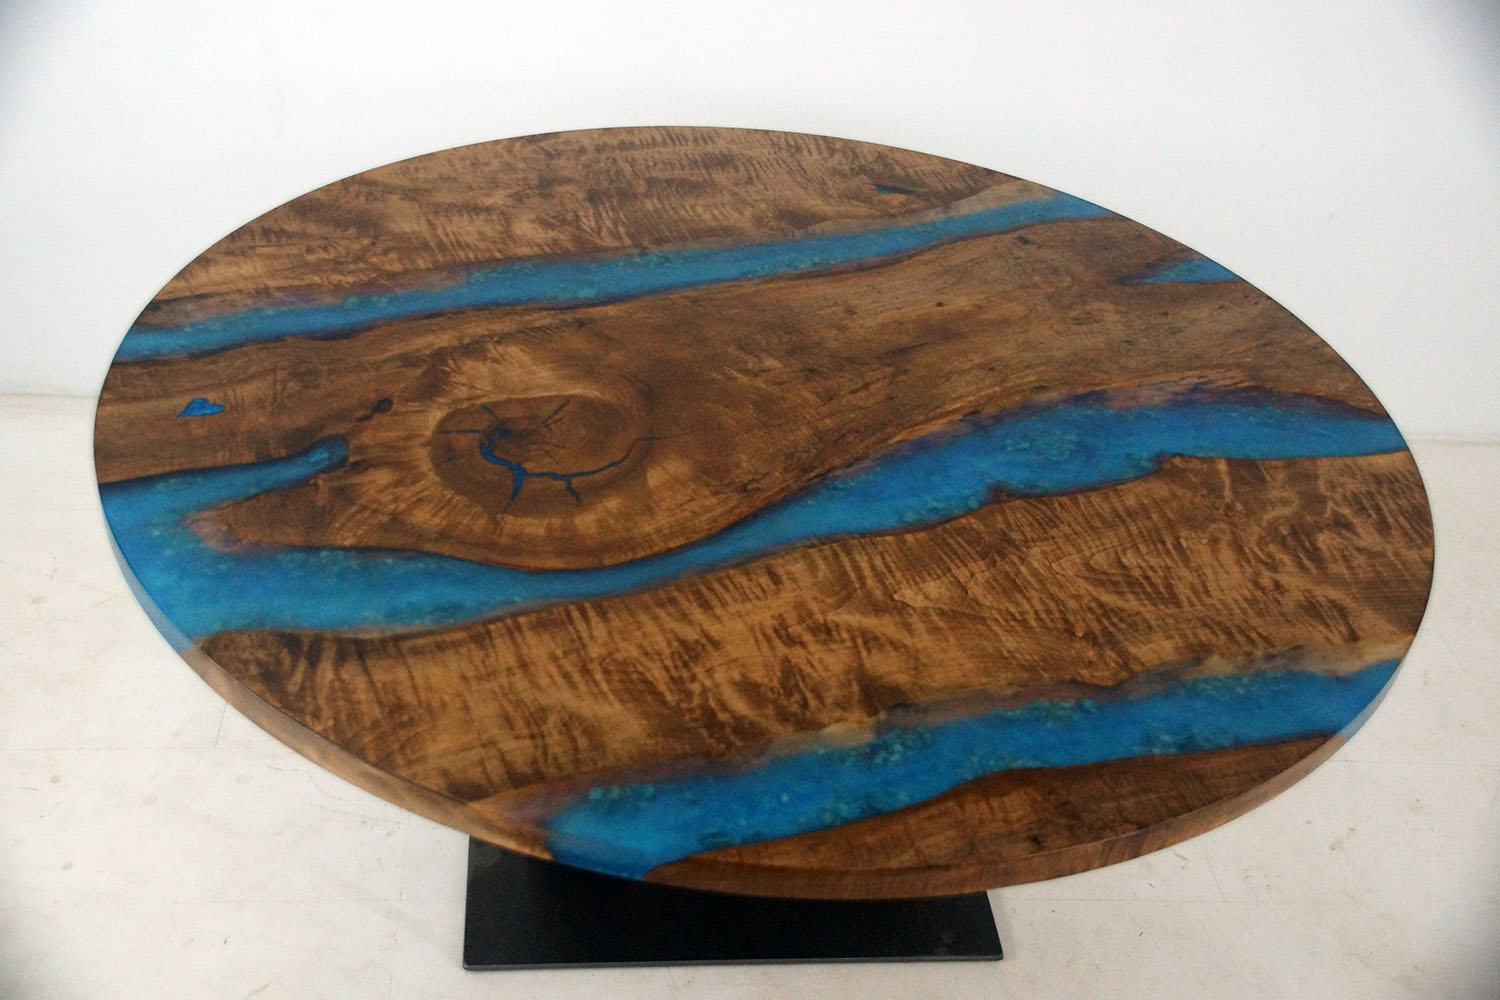 furniture design online to create custom furniture like this round epoxy resin river dining table for sale